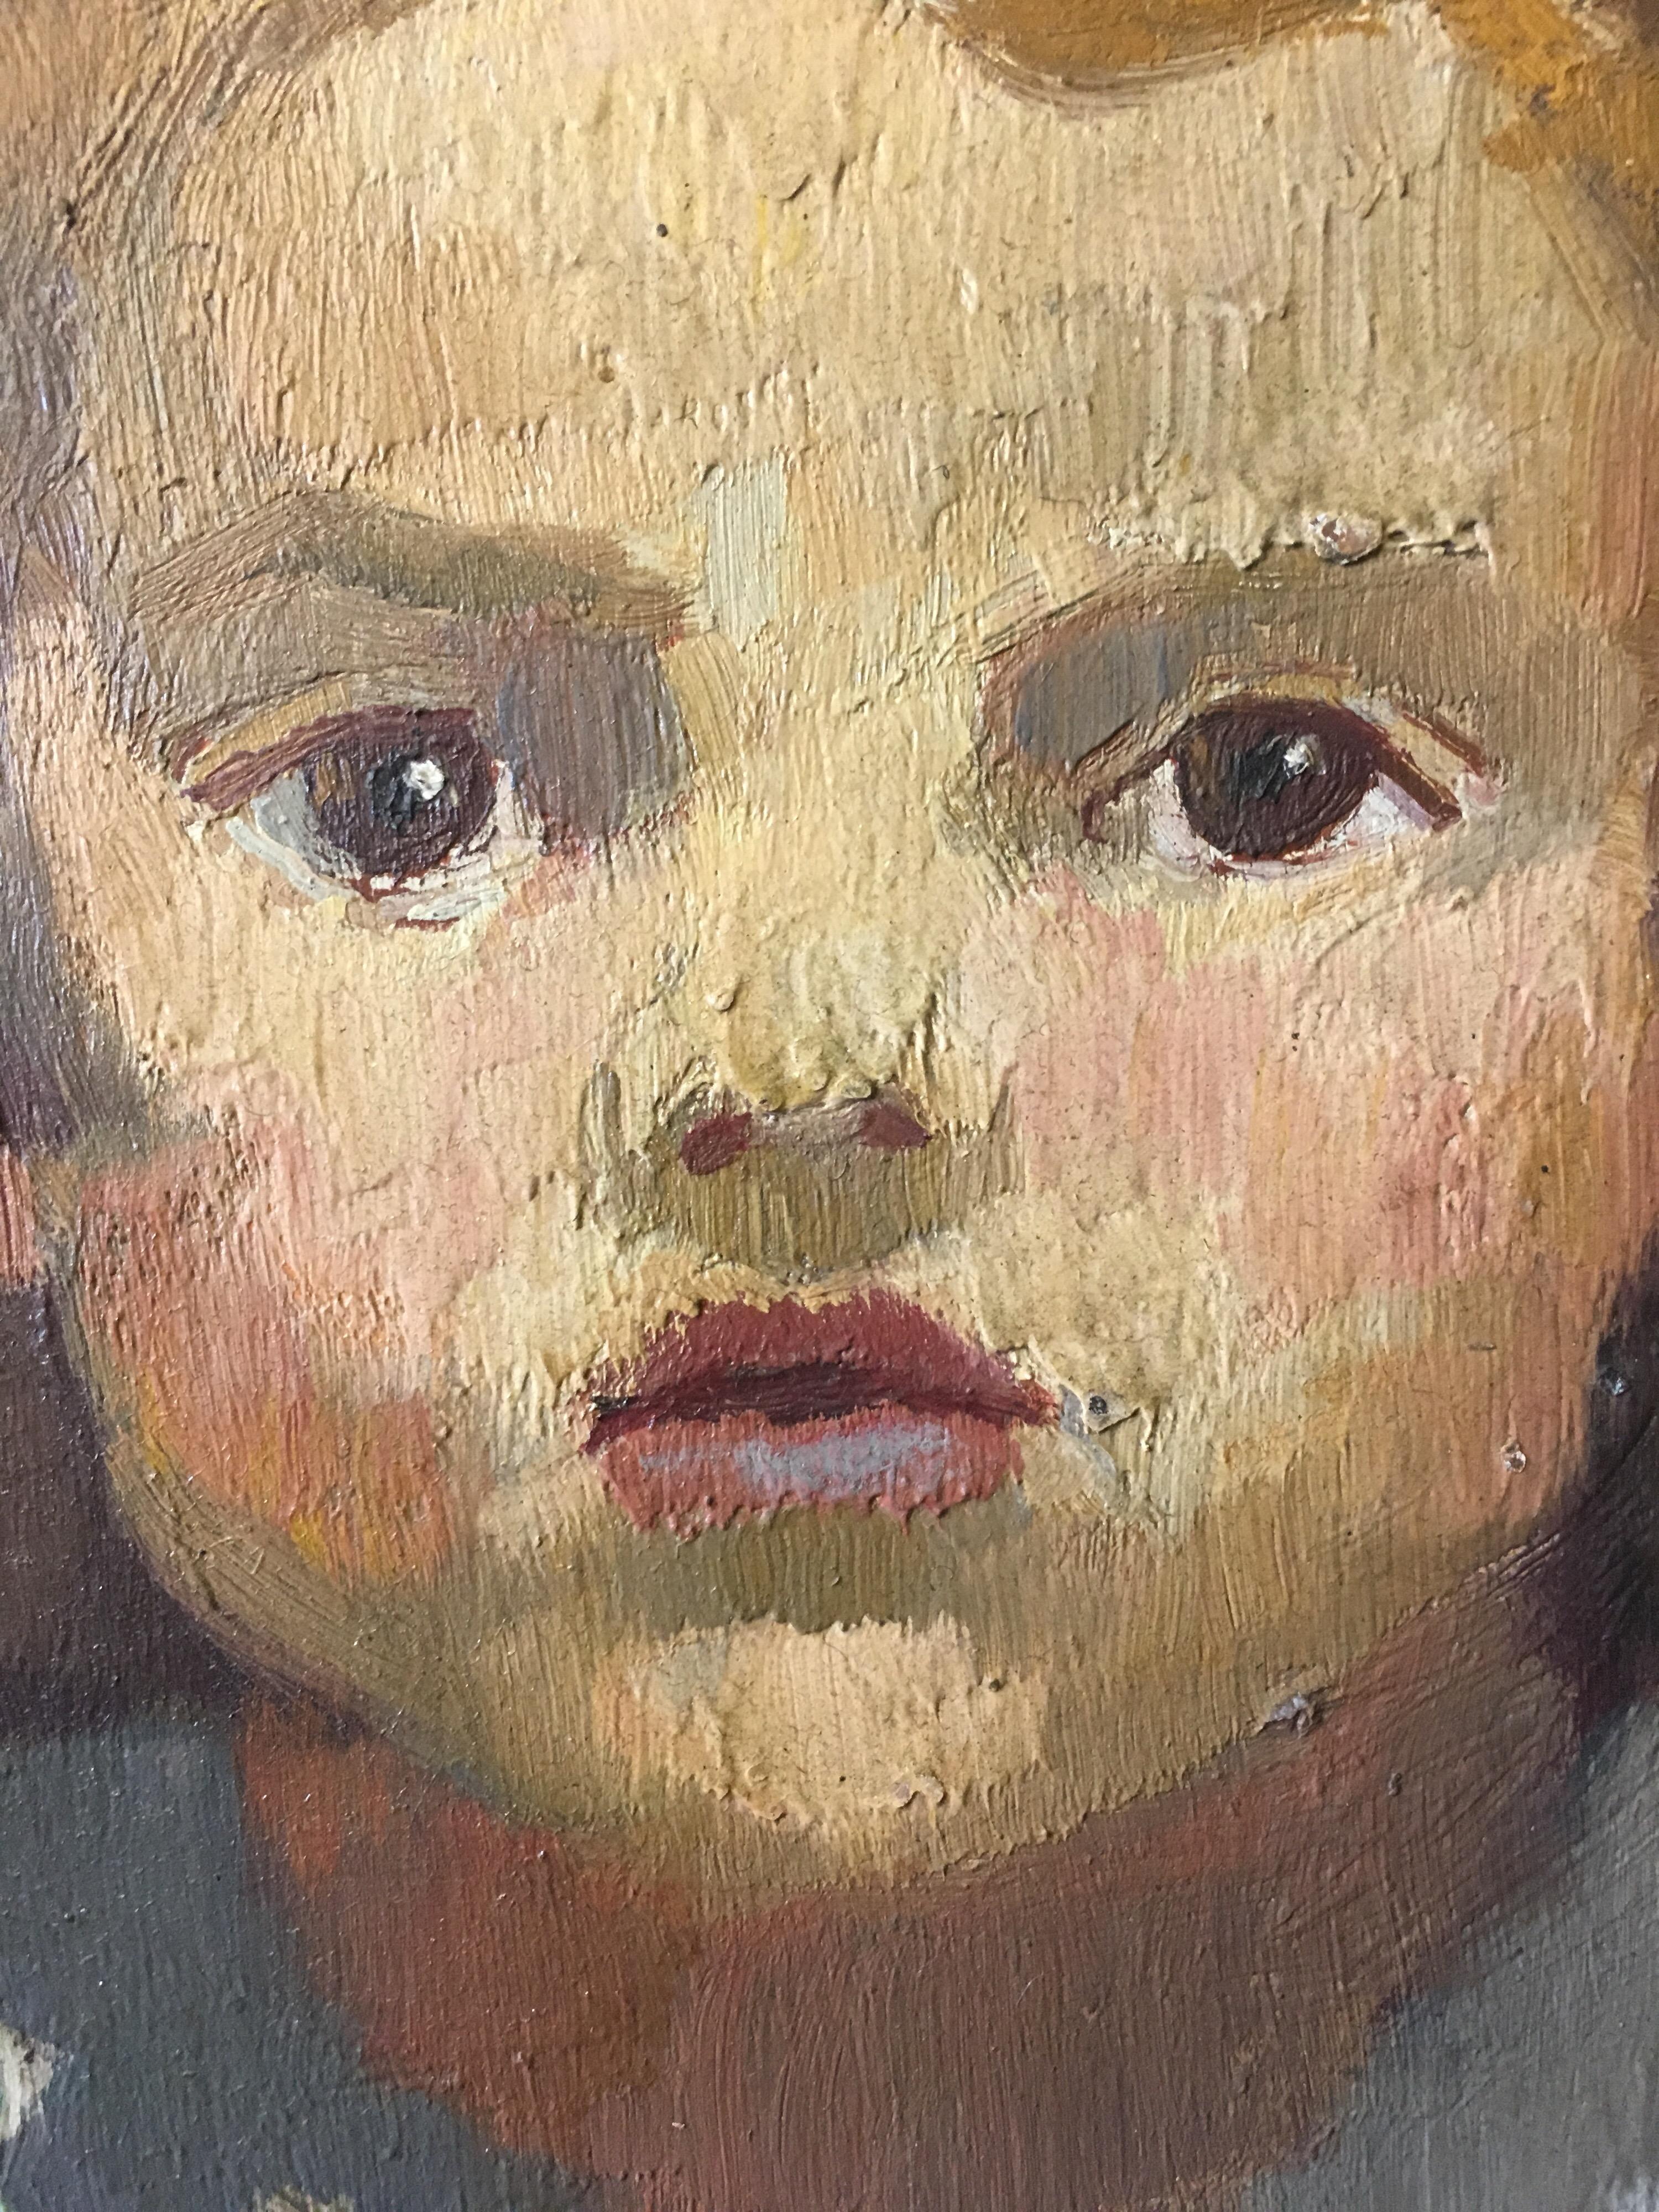 Little Girl in Pink, Impressionist Portrait, Signed Oil Painting
By French artist Claude Benard, (1926 - 2016)
Signed and dated '48 by the artist on the lower left hand corner
Oil painting on board, unframed
Board size: 13.5 x 10.5 inches

Sweet